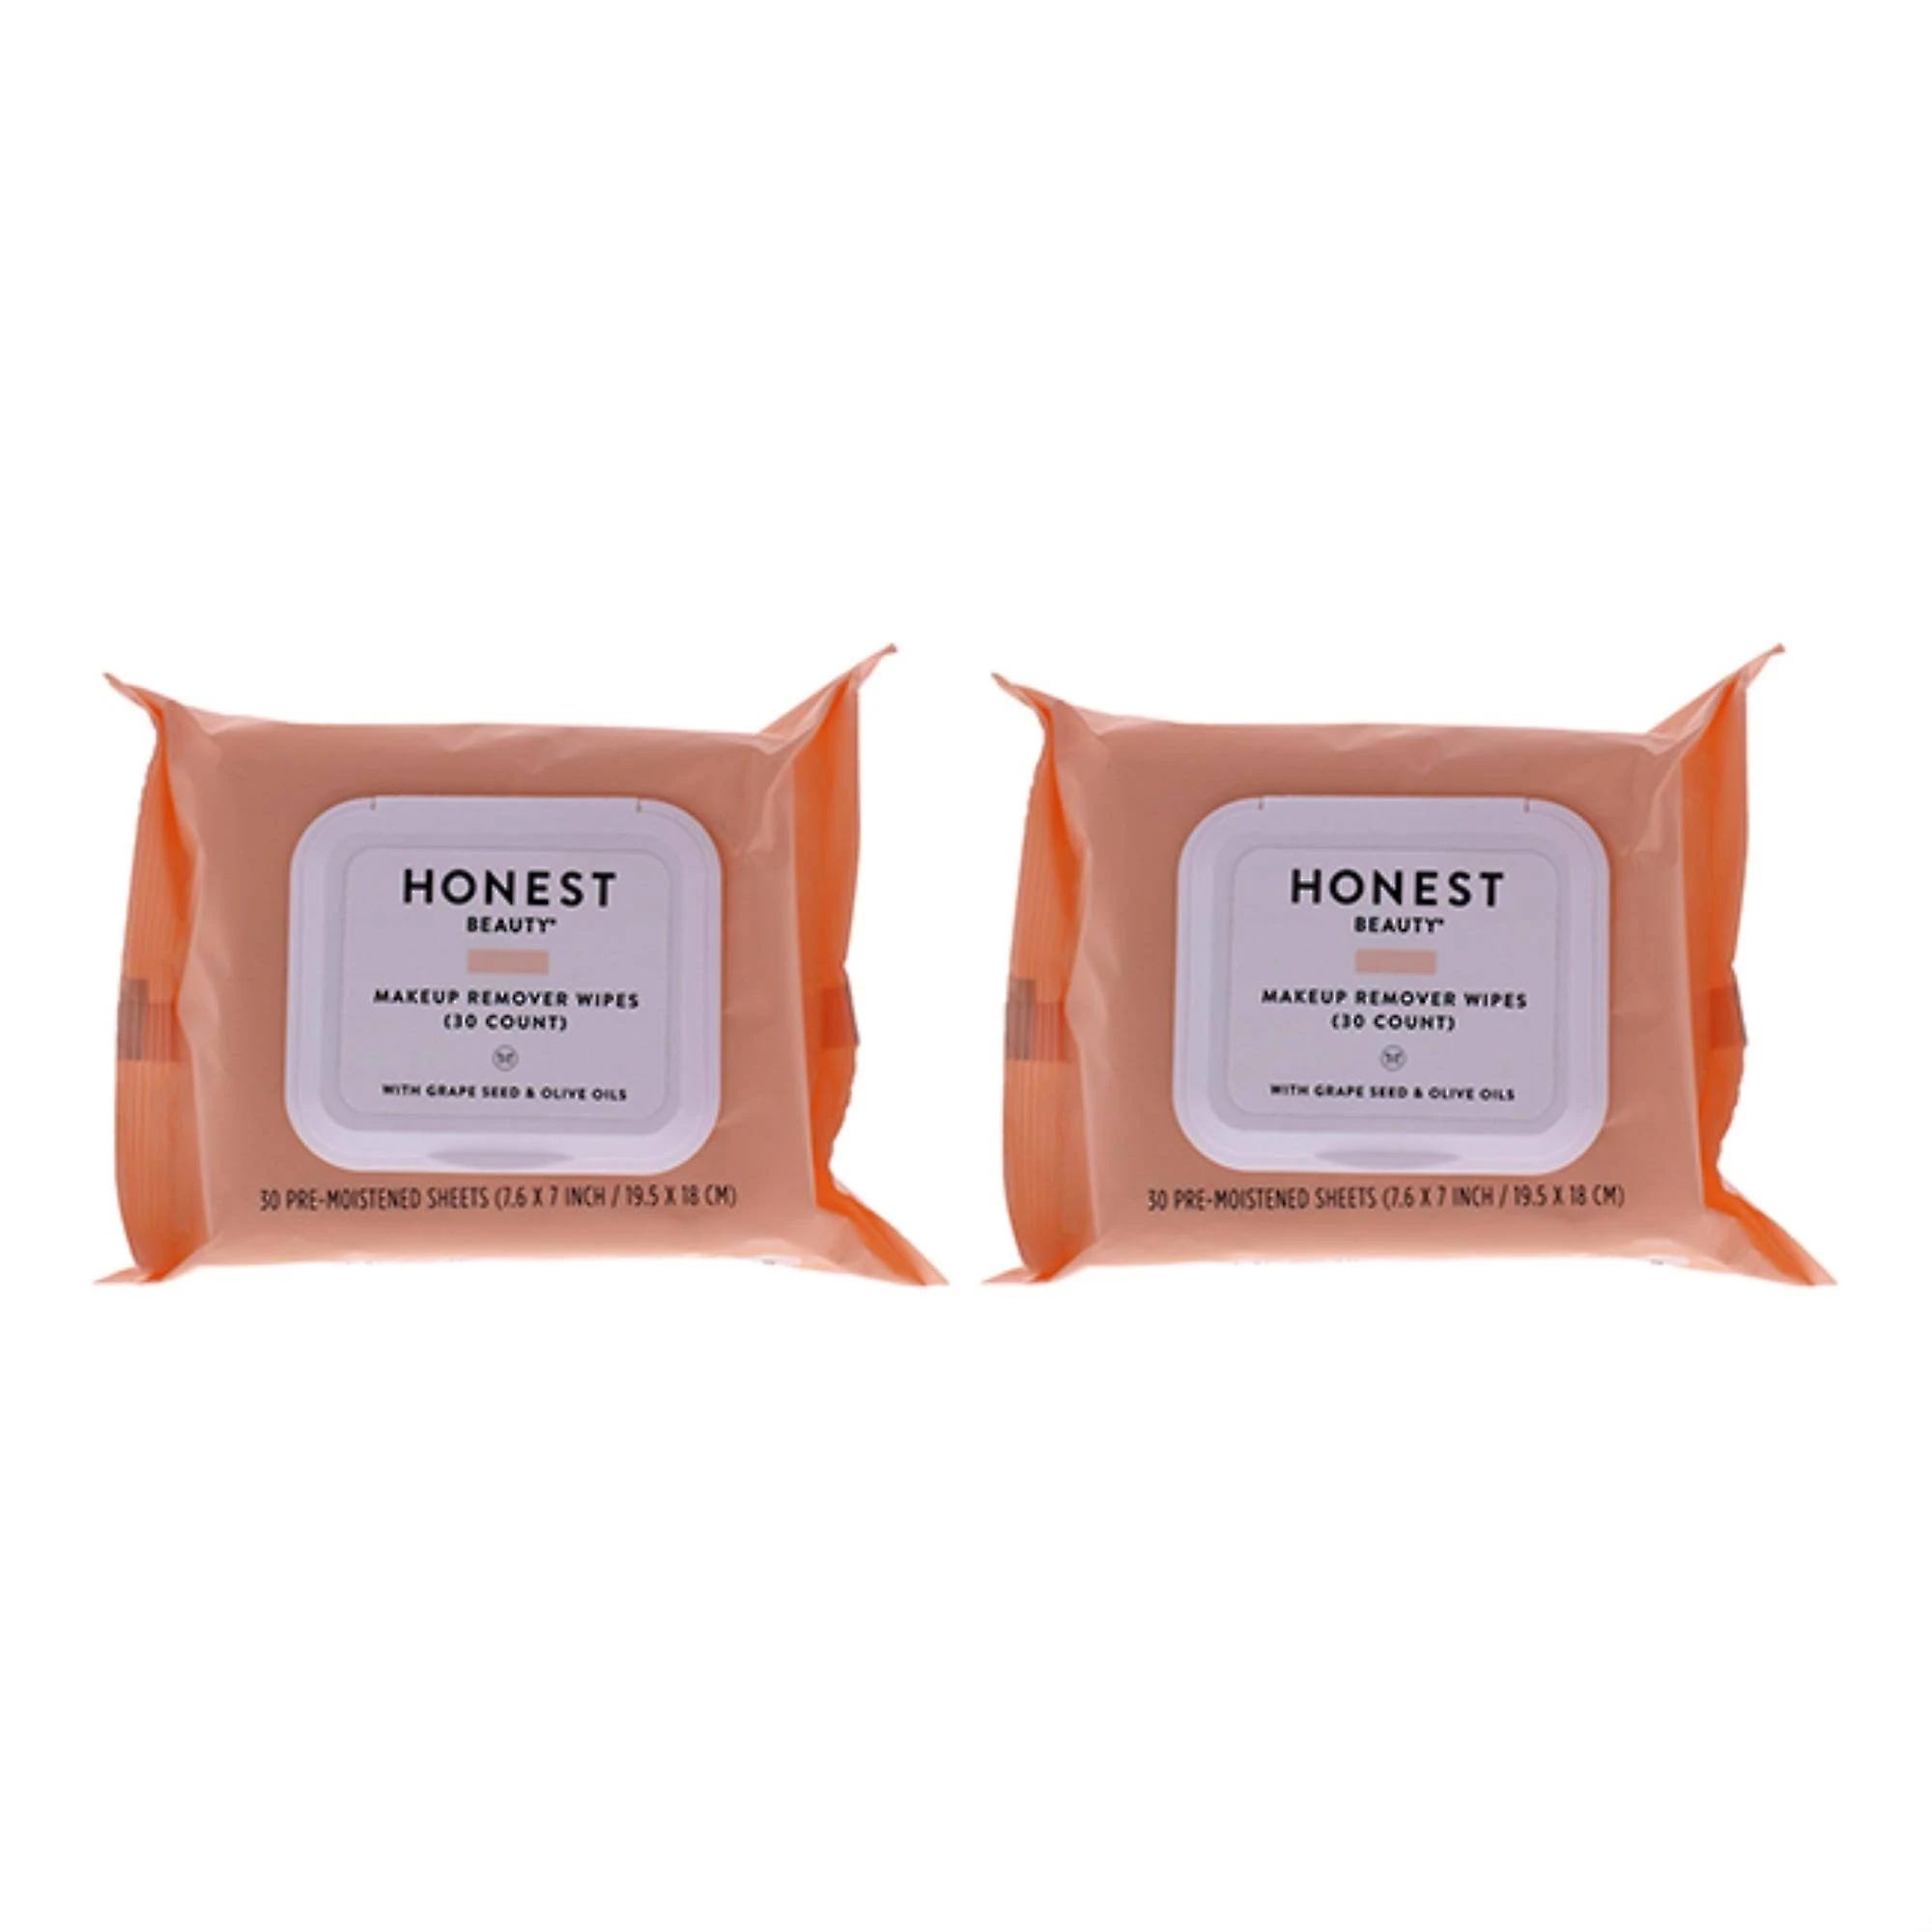 Honest Makeup Remover Wipes for Unisex (30 Count x 2 Packs) | Image